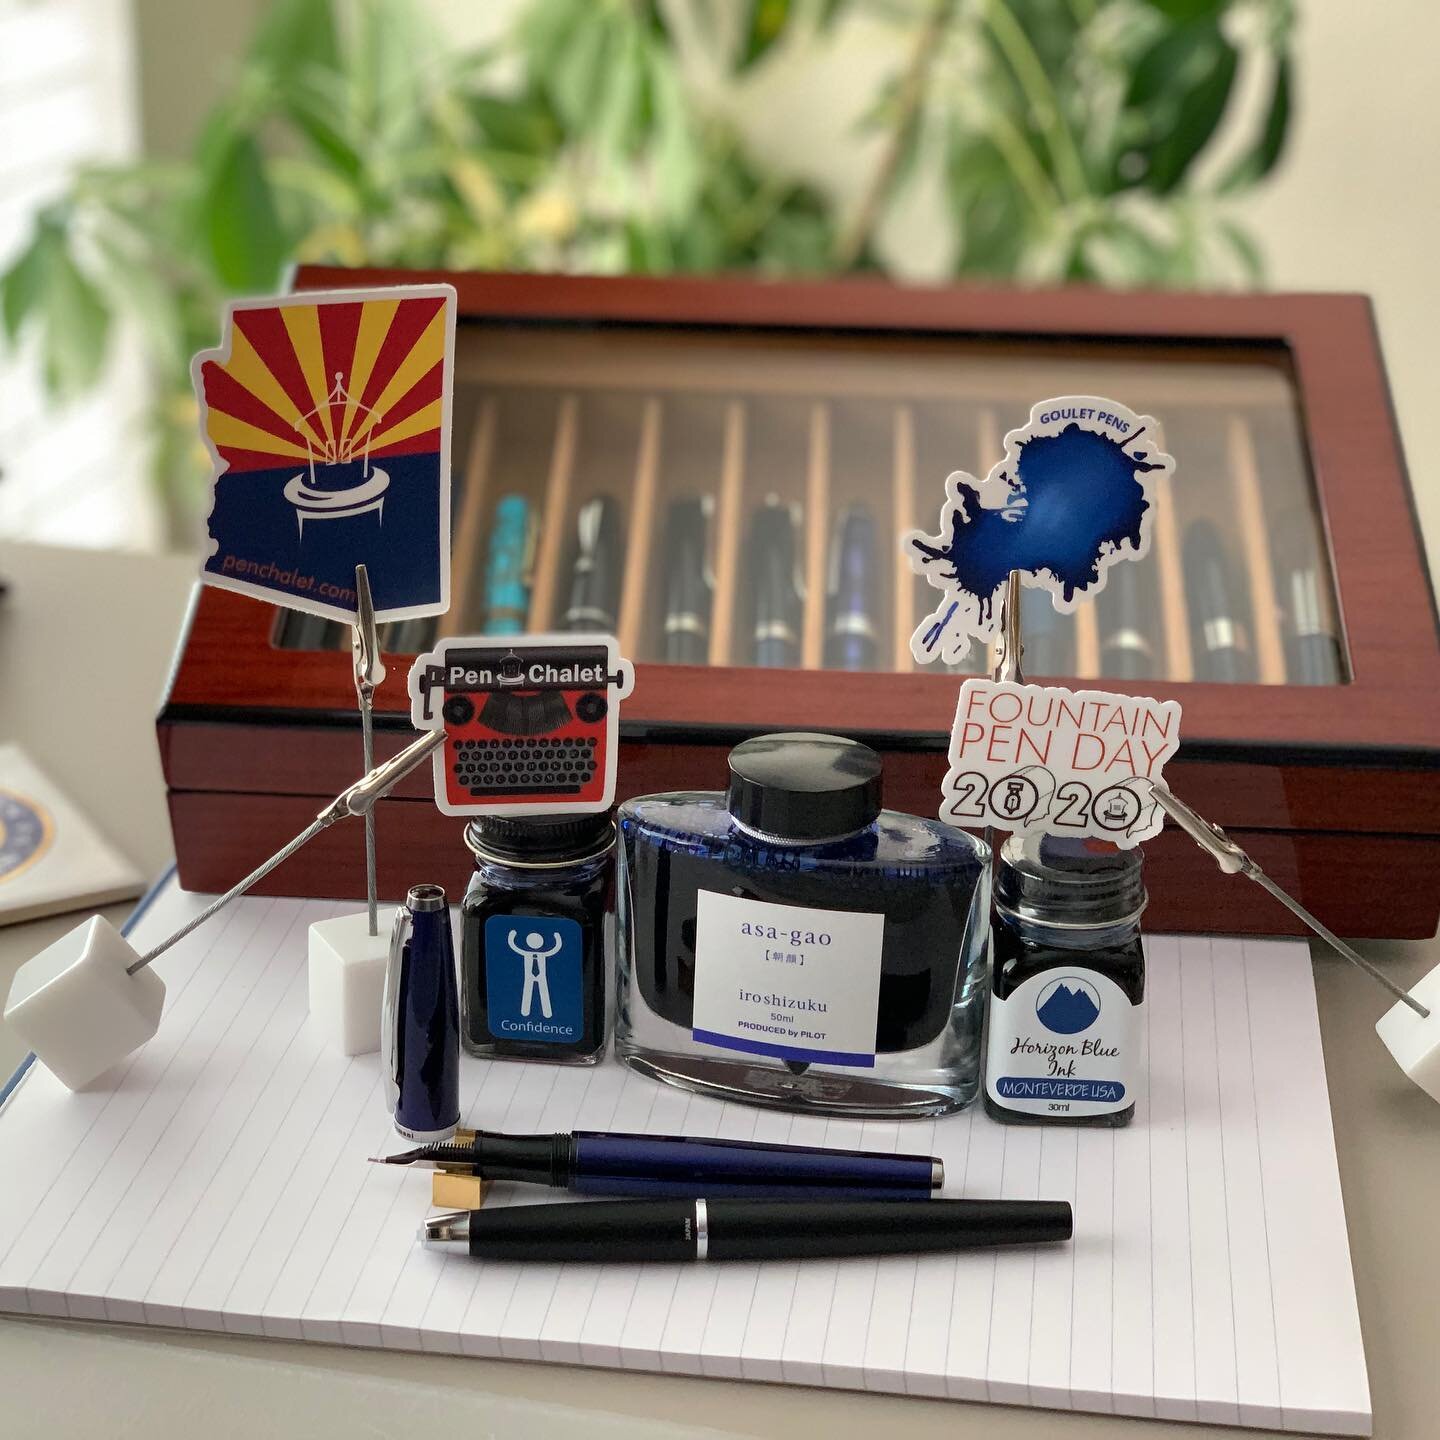 1st delivery of fountain pen haul from #fountainpenday2020 TY @penchalet for the &ldquo;confidence blue&rdquo;, sticker, &amp; swift shipping. #writeon as @gouletpens would say 🖊 ✒️ @fountainpenday @figboot11  @fountainpenhospital